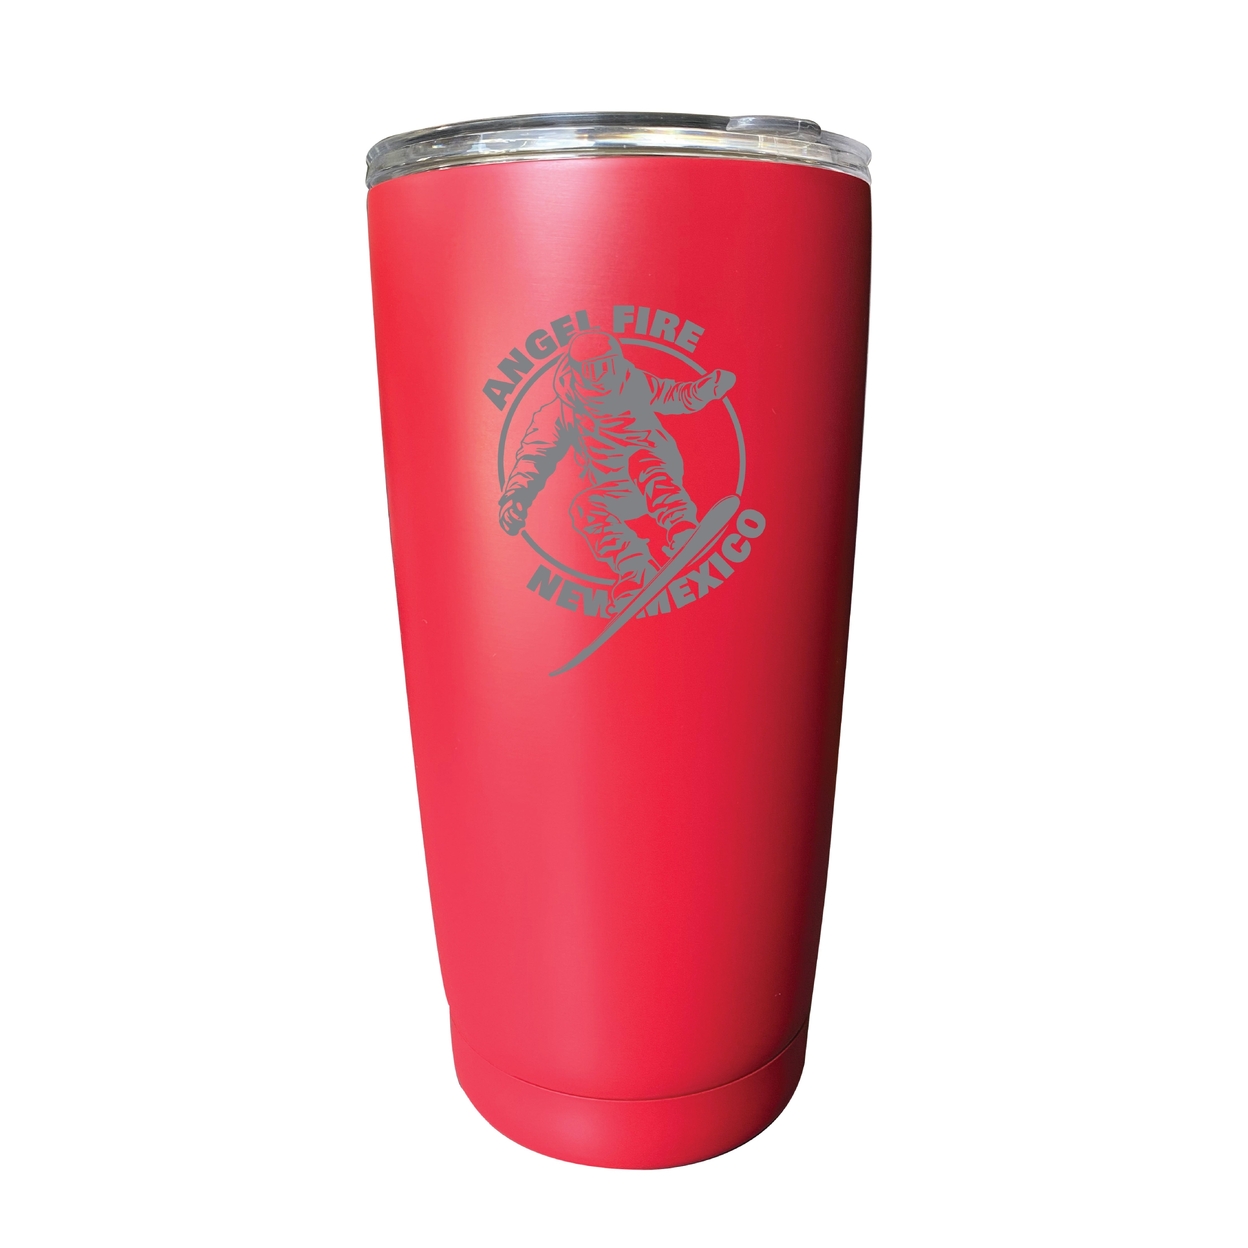 Angel Fire New Mexico Souvenir 16 Oz Engraved Stainless Steel Insulated Tumbler - Red,,4-Pack